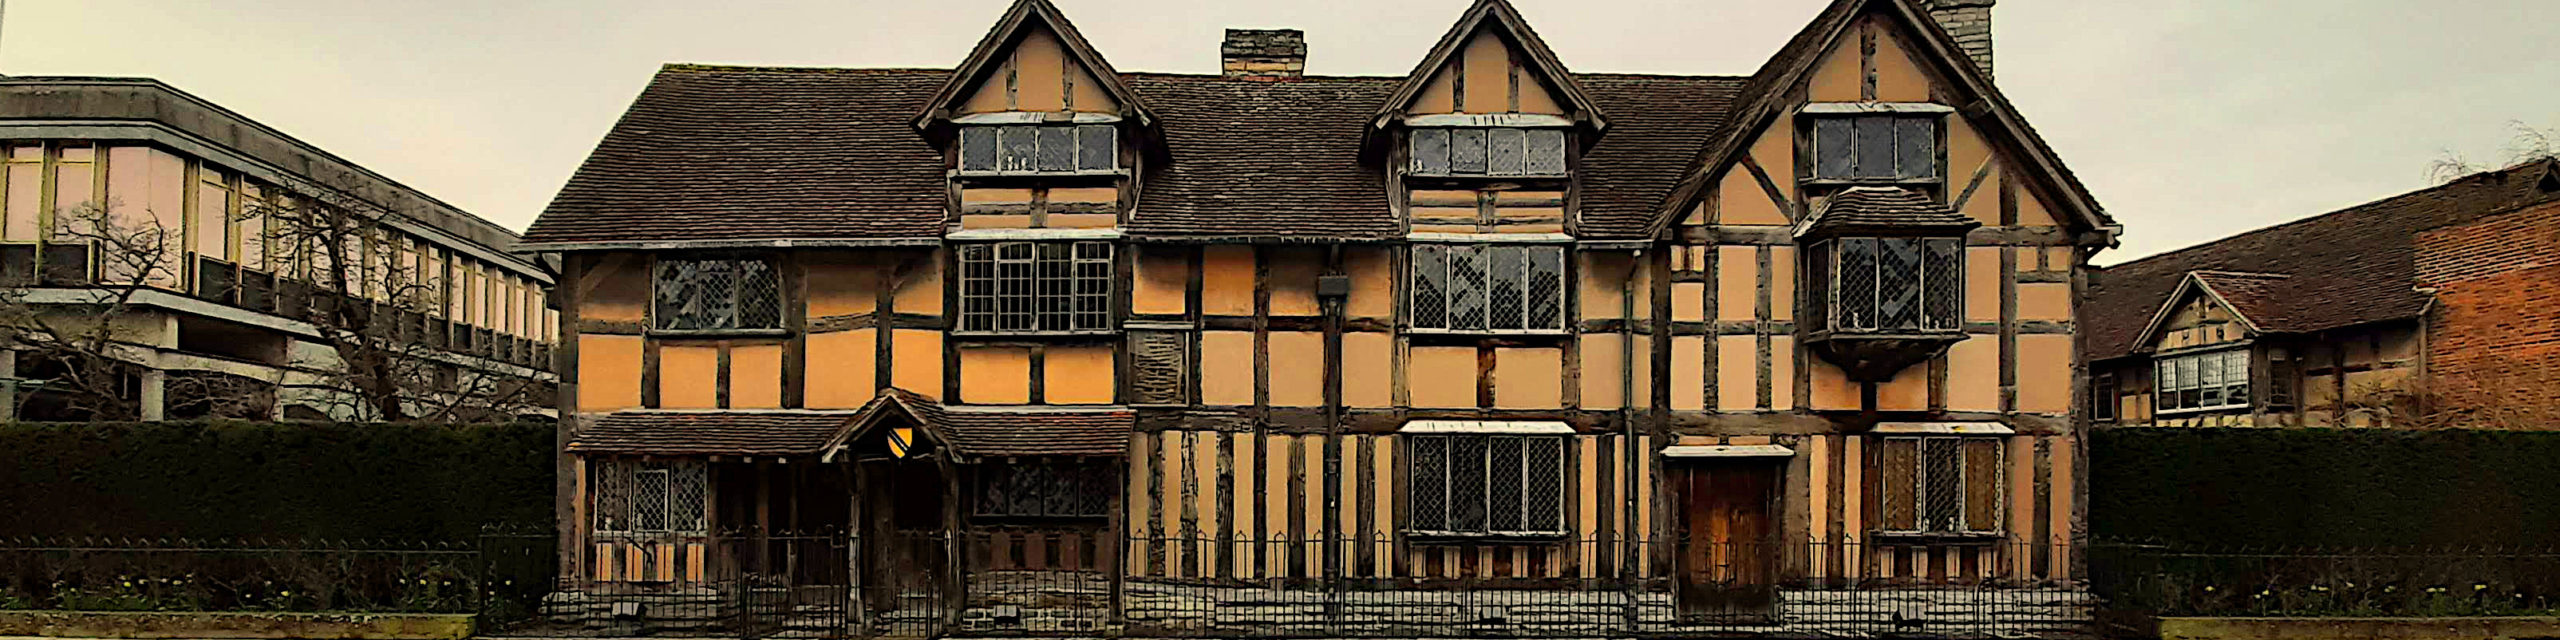 A photo of Shakespeare's Birthplace - so close to the Cotswolds from Stratford